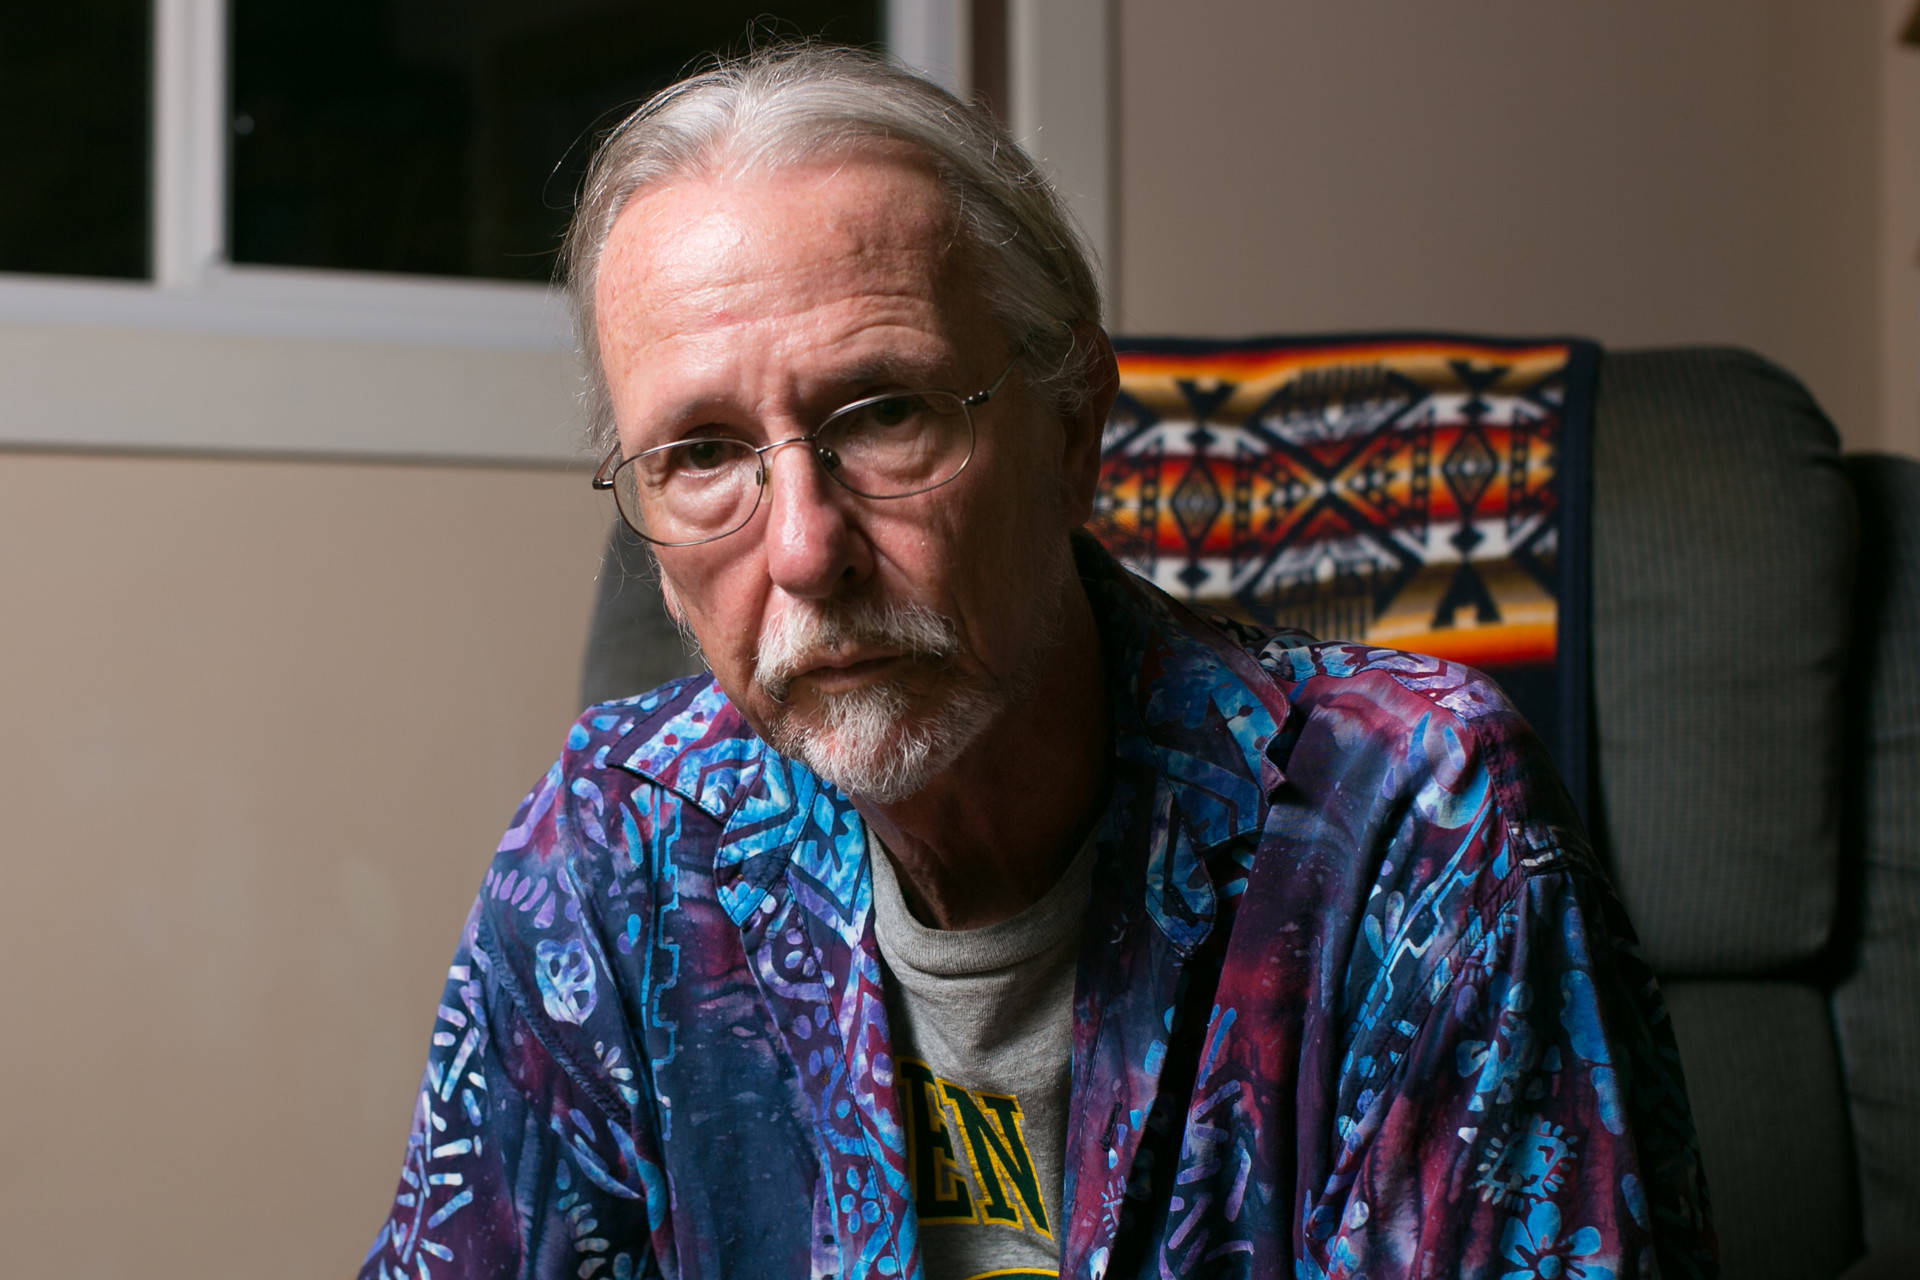 David Meisenheimer
successfully received the status of conscientious objector during the Vietnam War, which kept him from being drafted. He was photographed in his home on Sept. 12, 2017. Bert Johnson/KQED